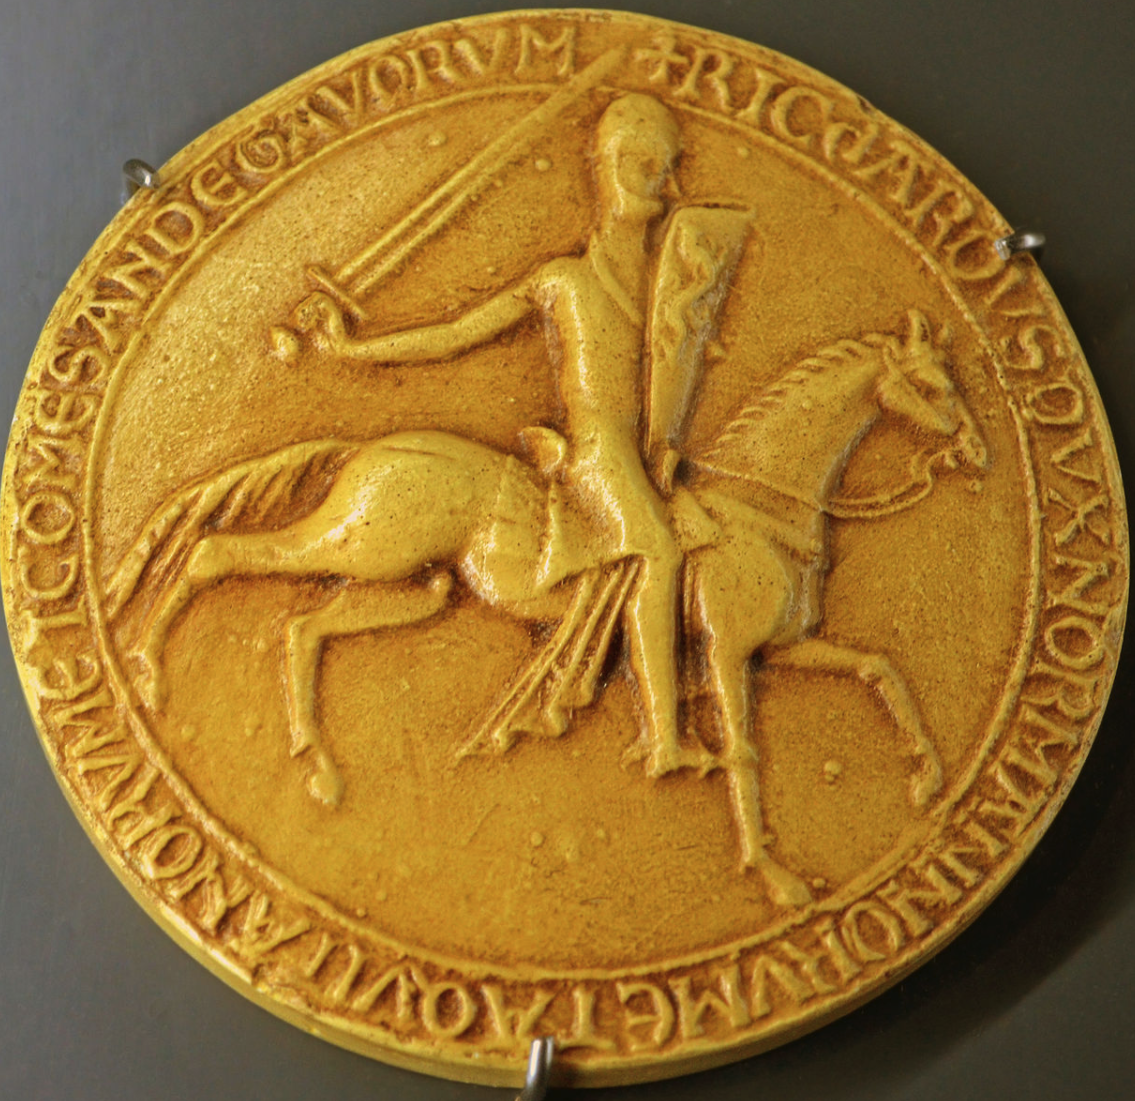 The great seal of Richard I.